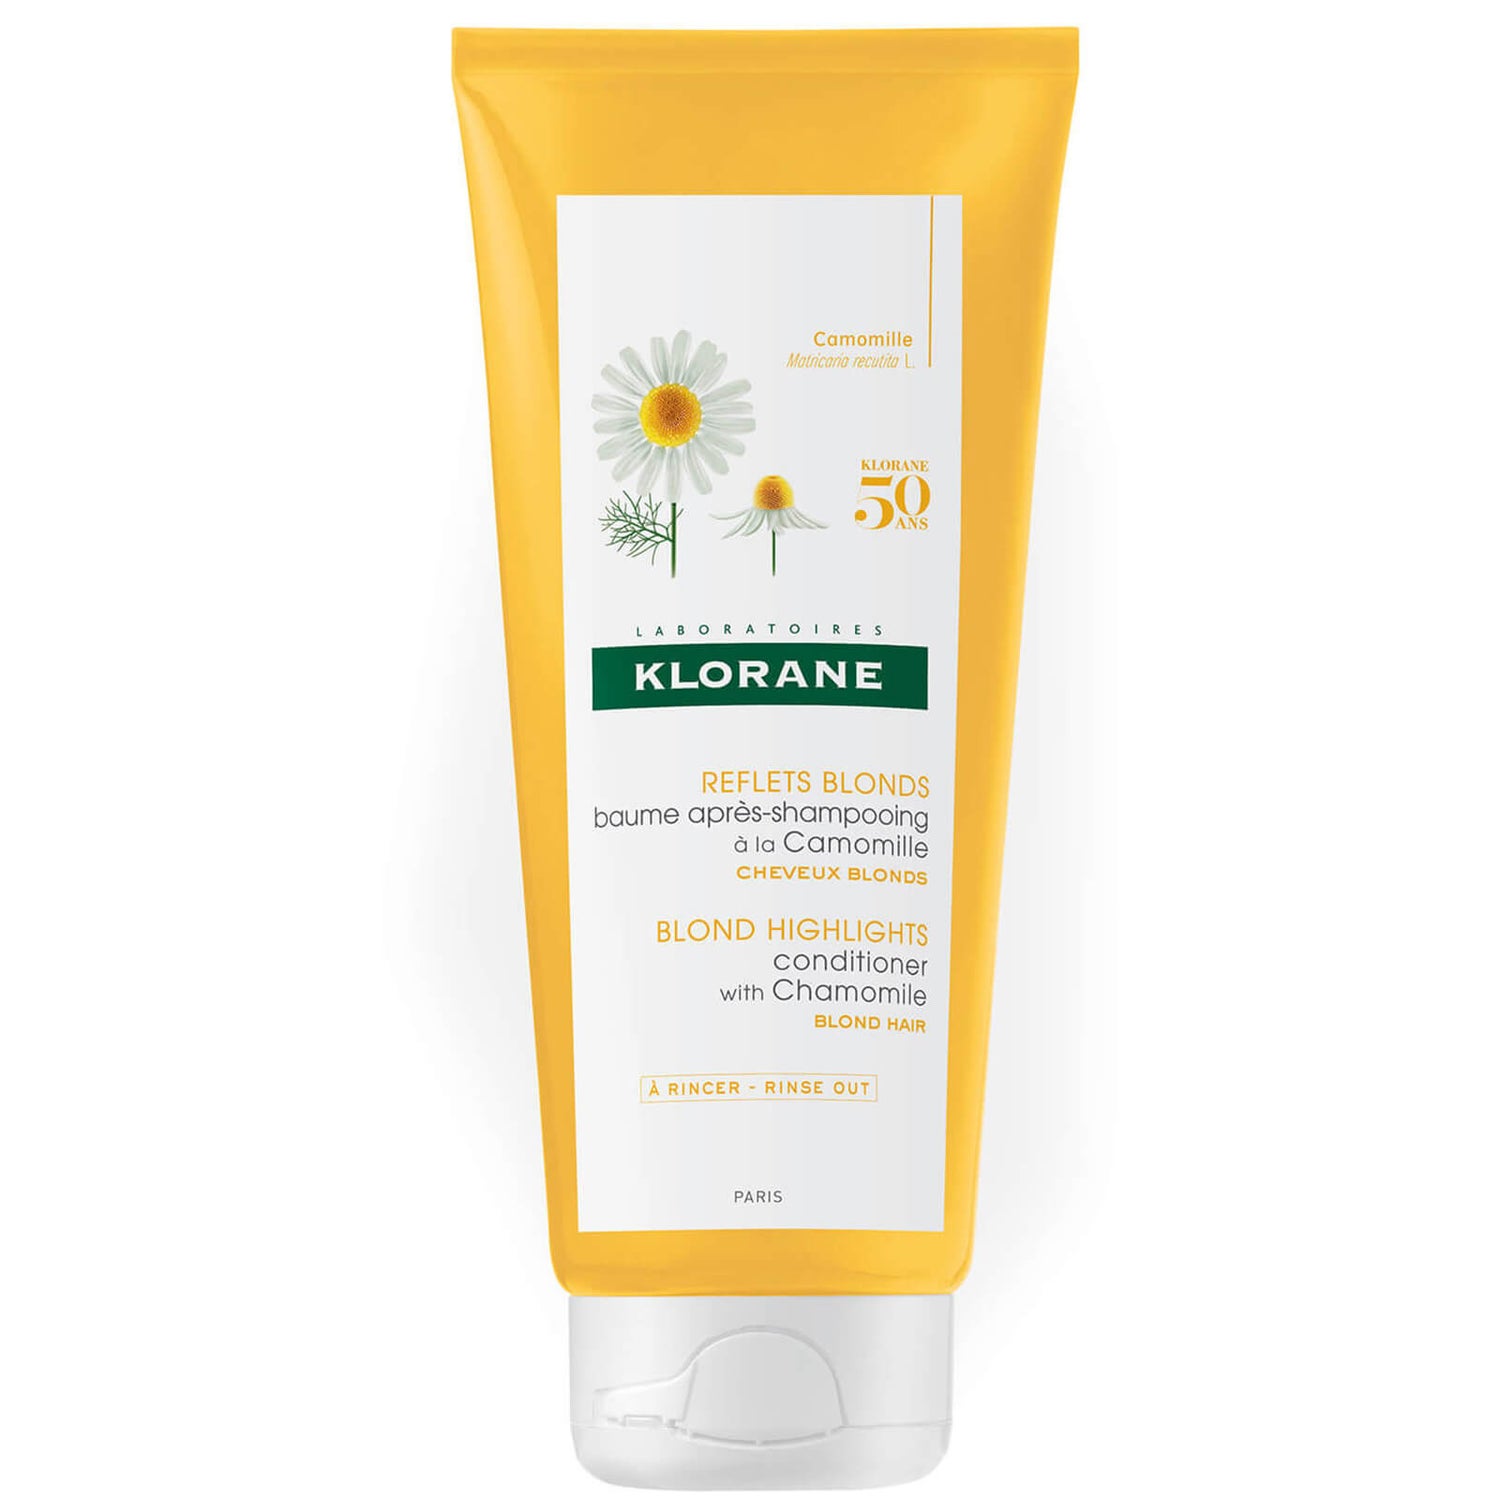 KLORANE Brightening Conditioner with Camomile for Blonde Hair 200ml